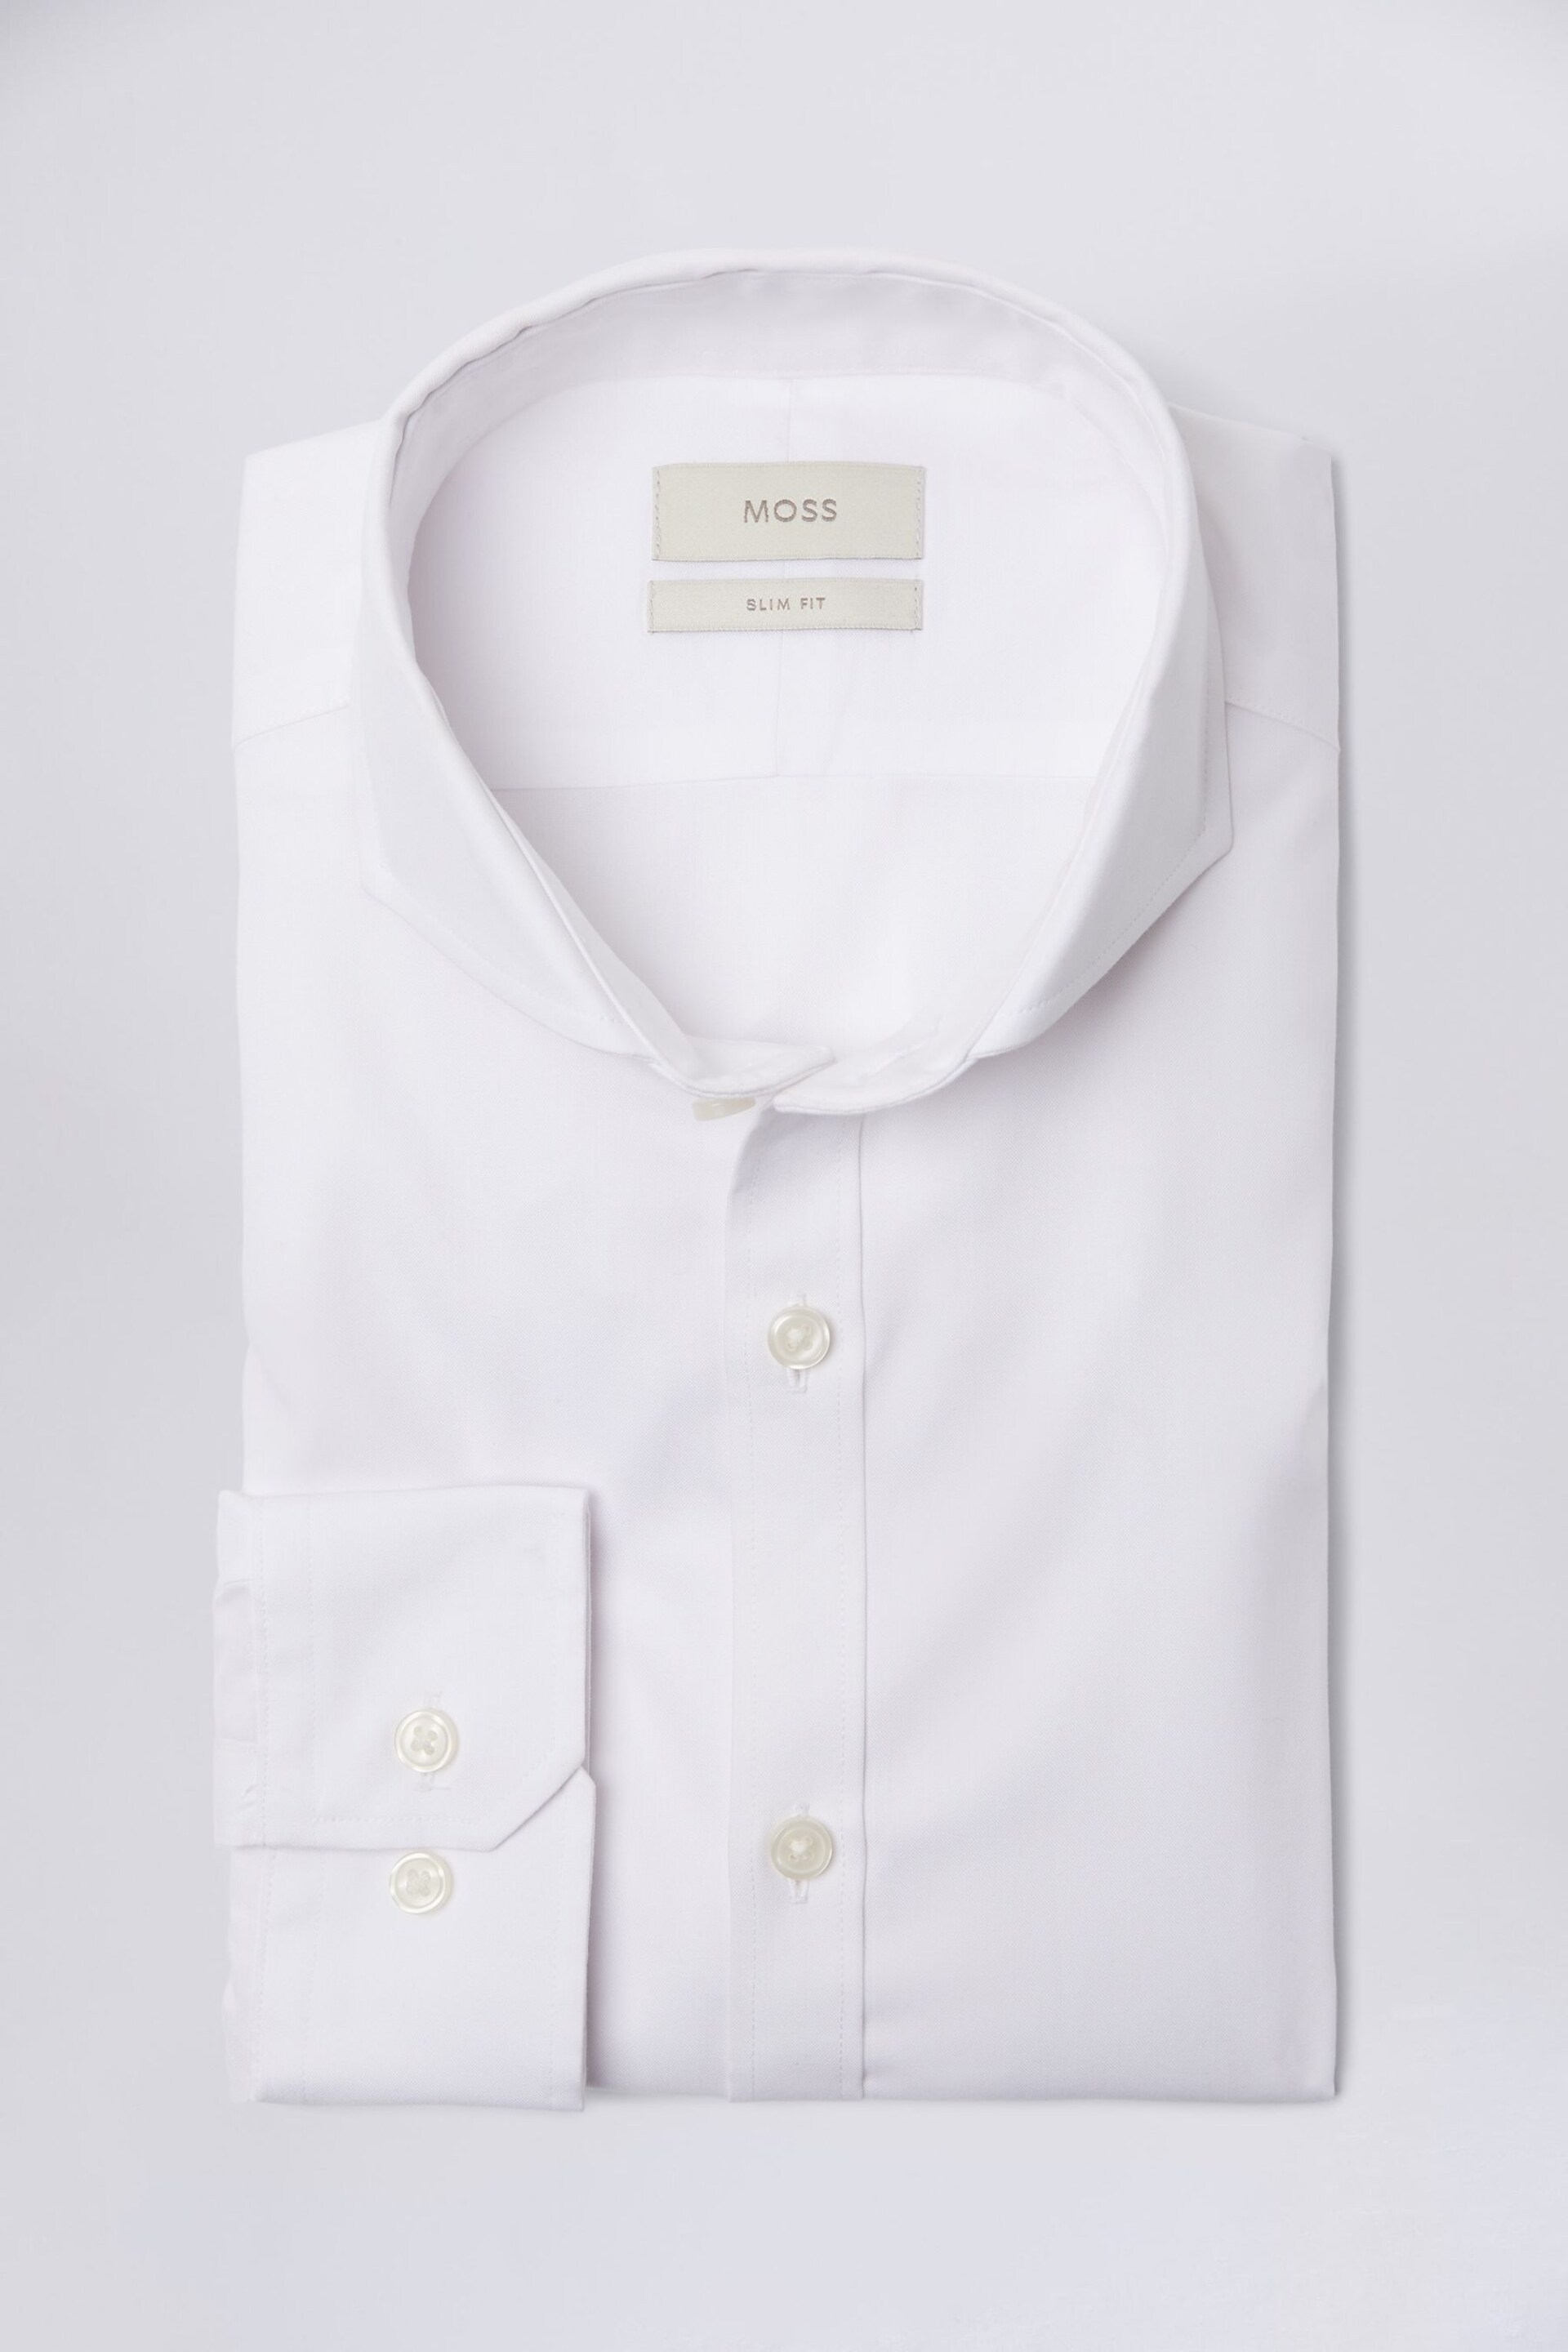 MOSS Slim Fit Pinpoint Oxford Non- Iron Shirt - Image 4 of 4